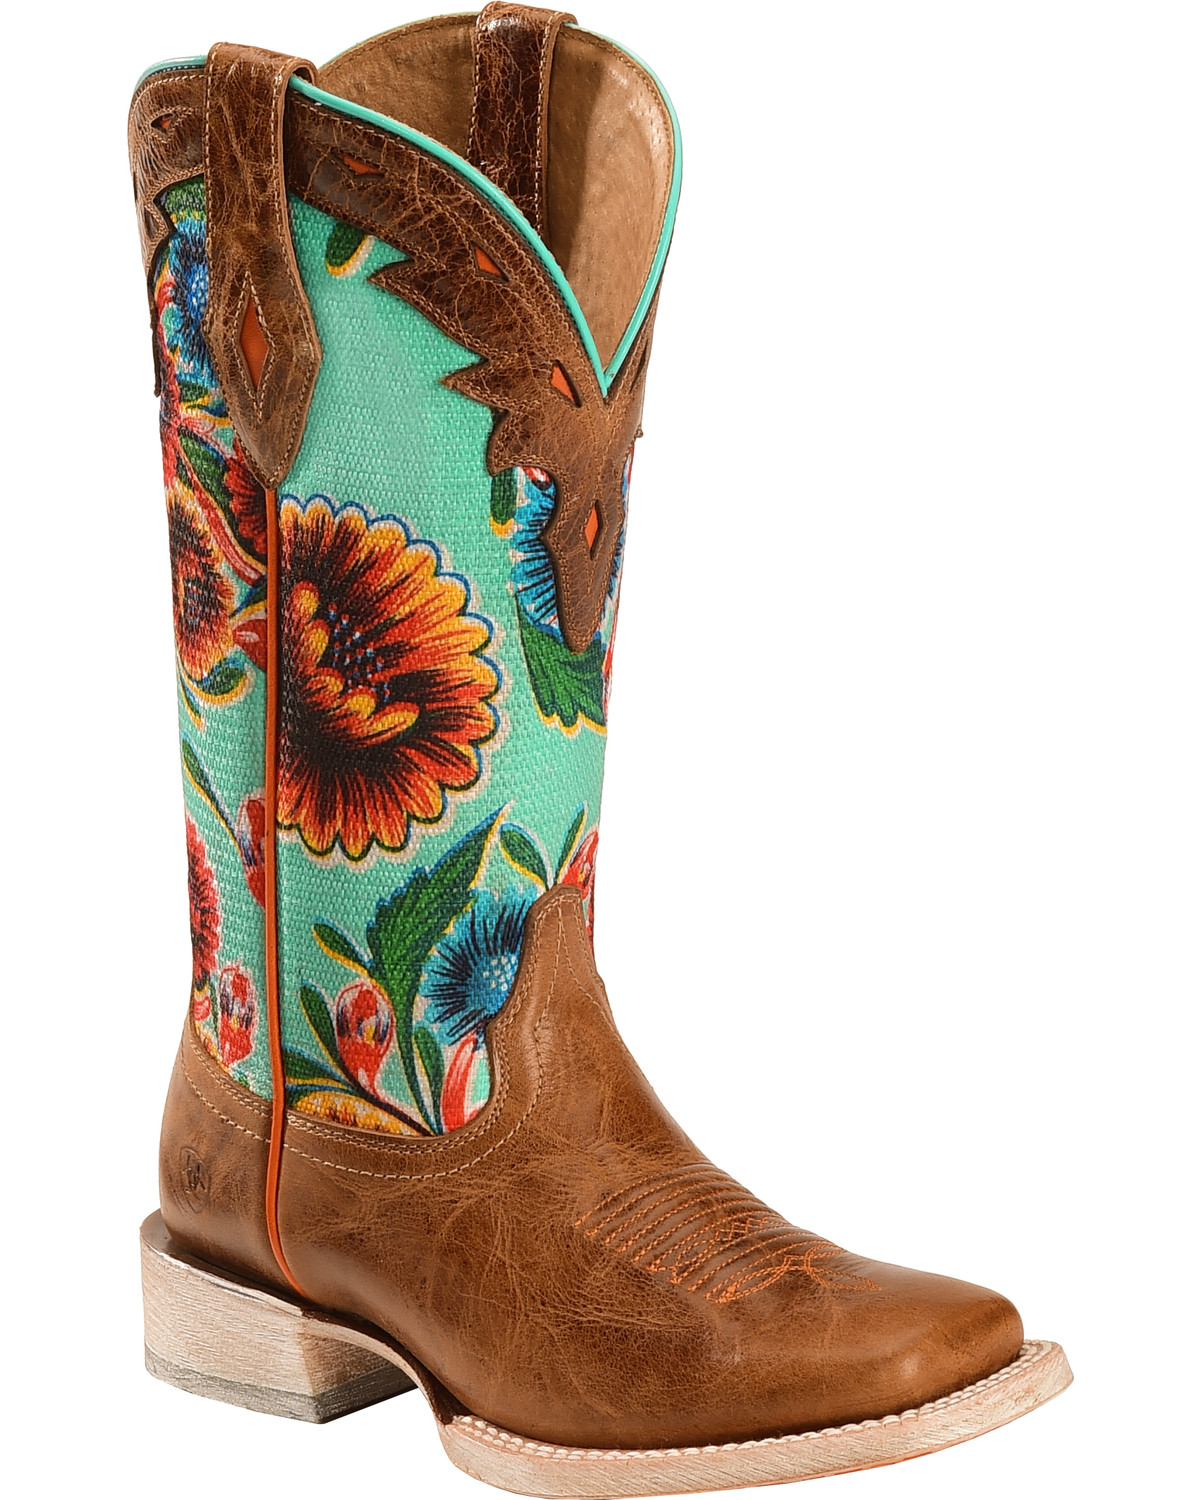 Ariat Women's Floral Textile Circuit Champion Western Boots - Broad Square Toe